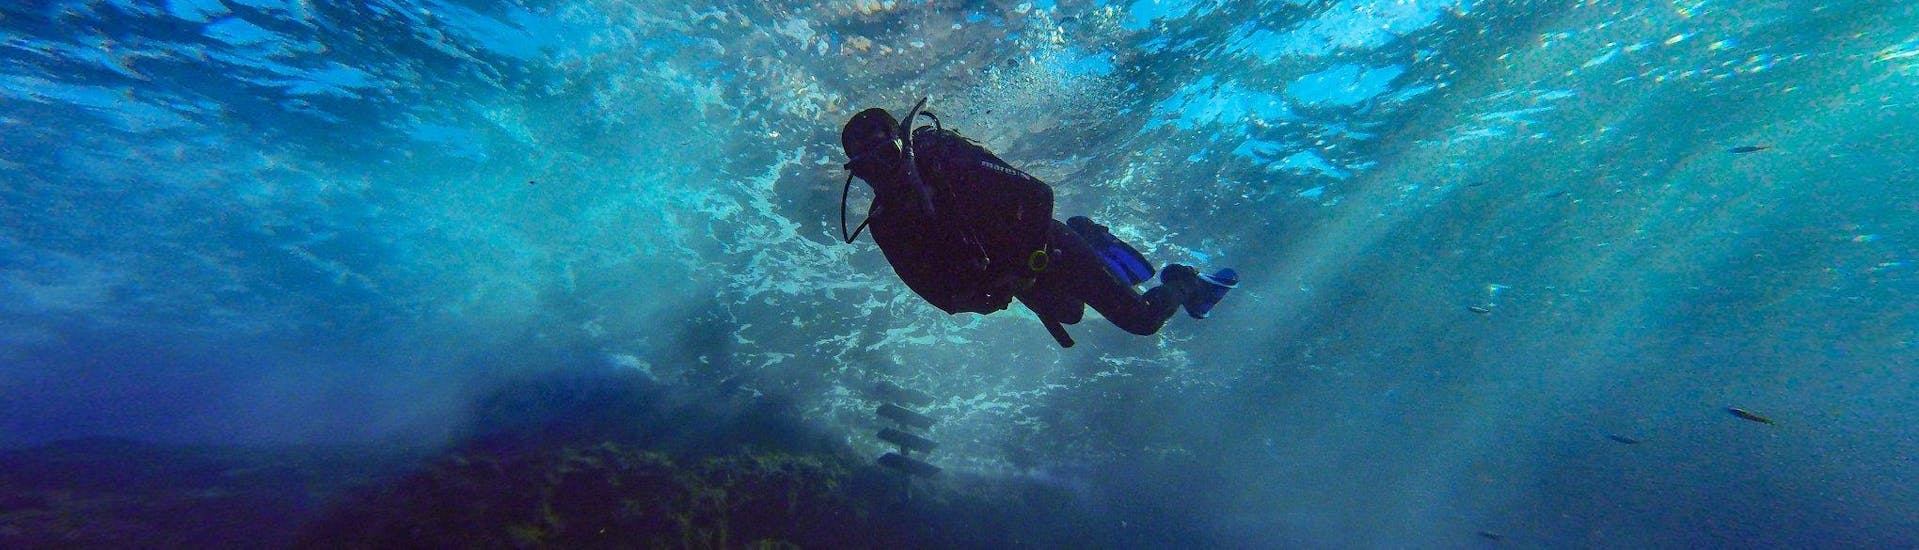 PADI Open Water Diver Course for Beginners in Bugibba, Malta.